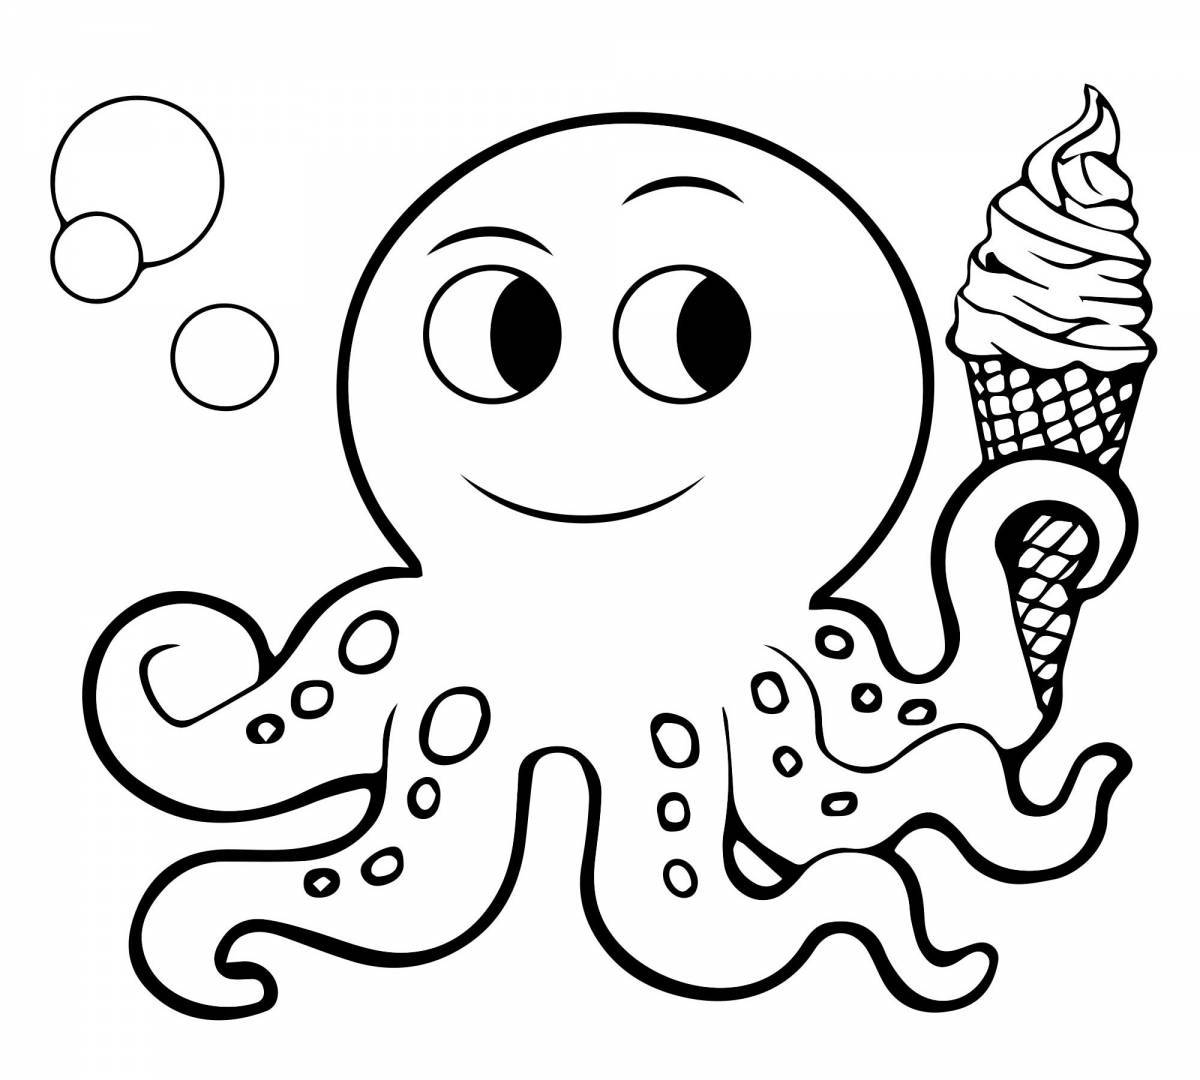 Adorable octopus coloring book for kids